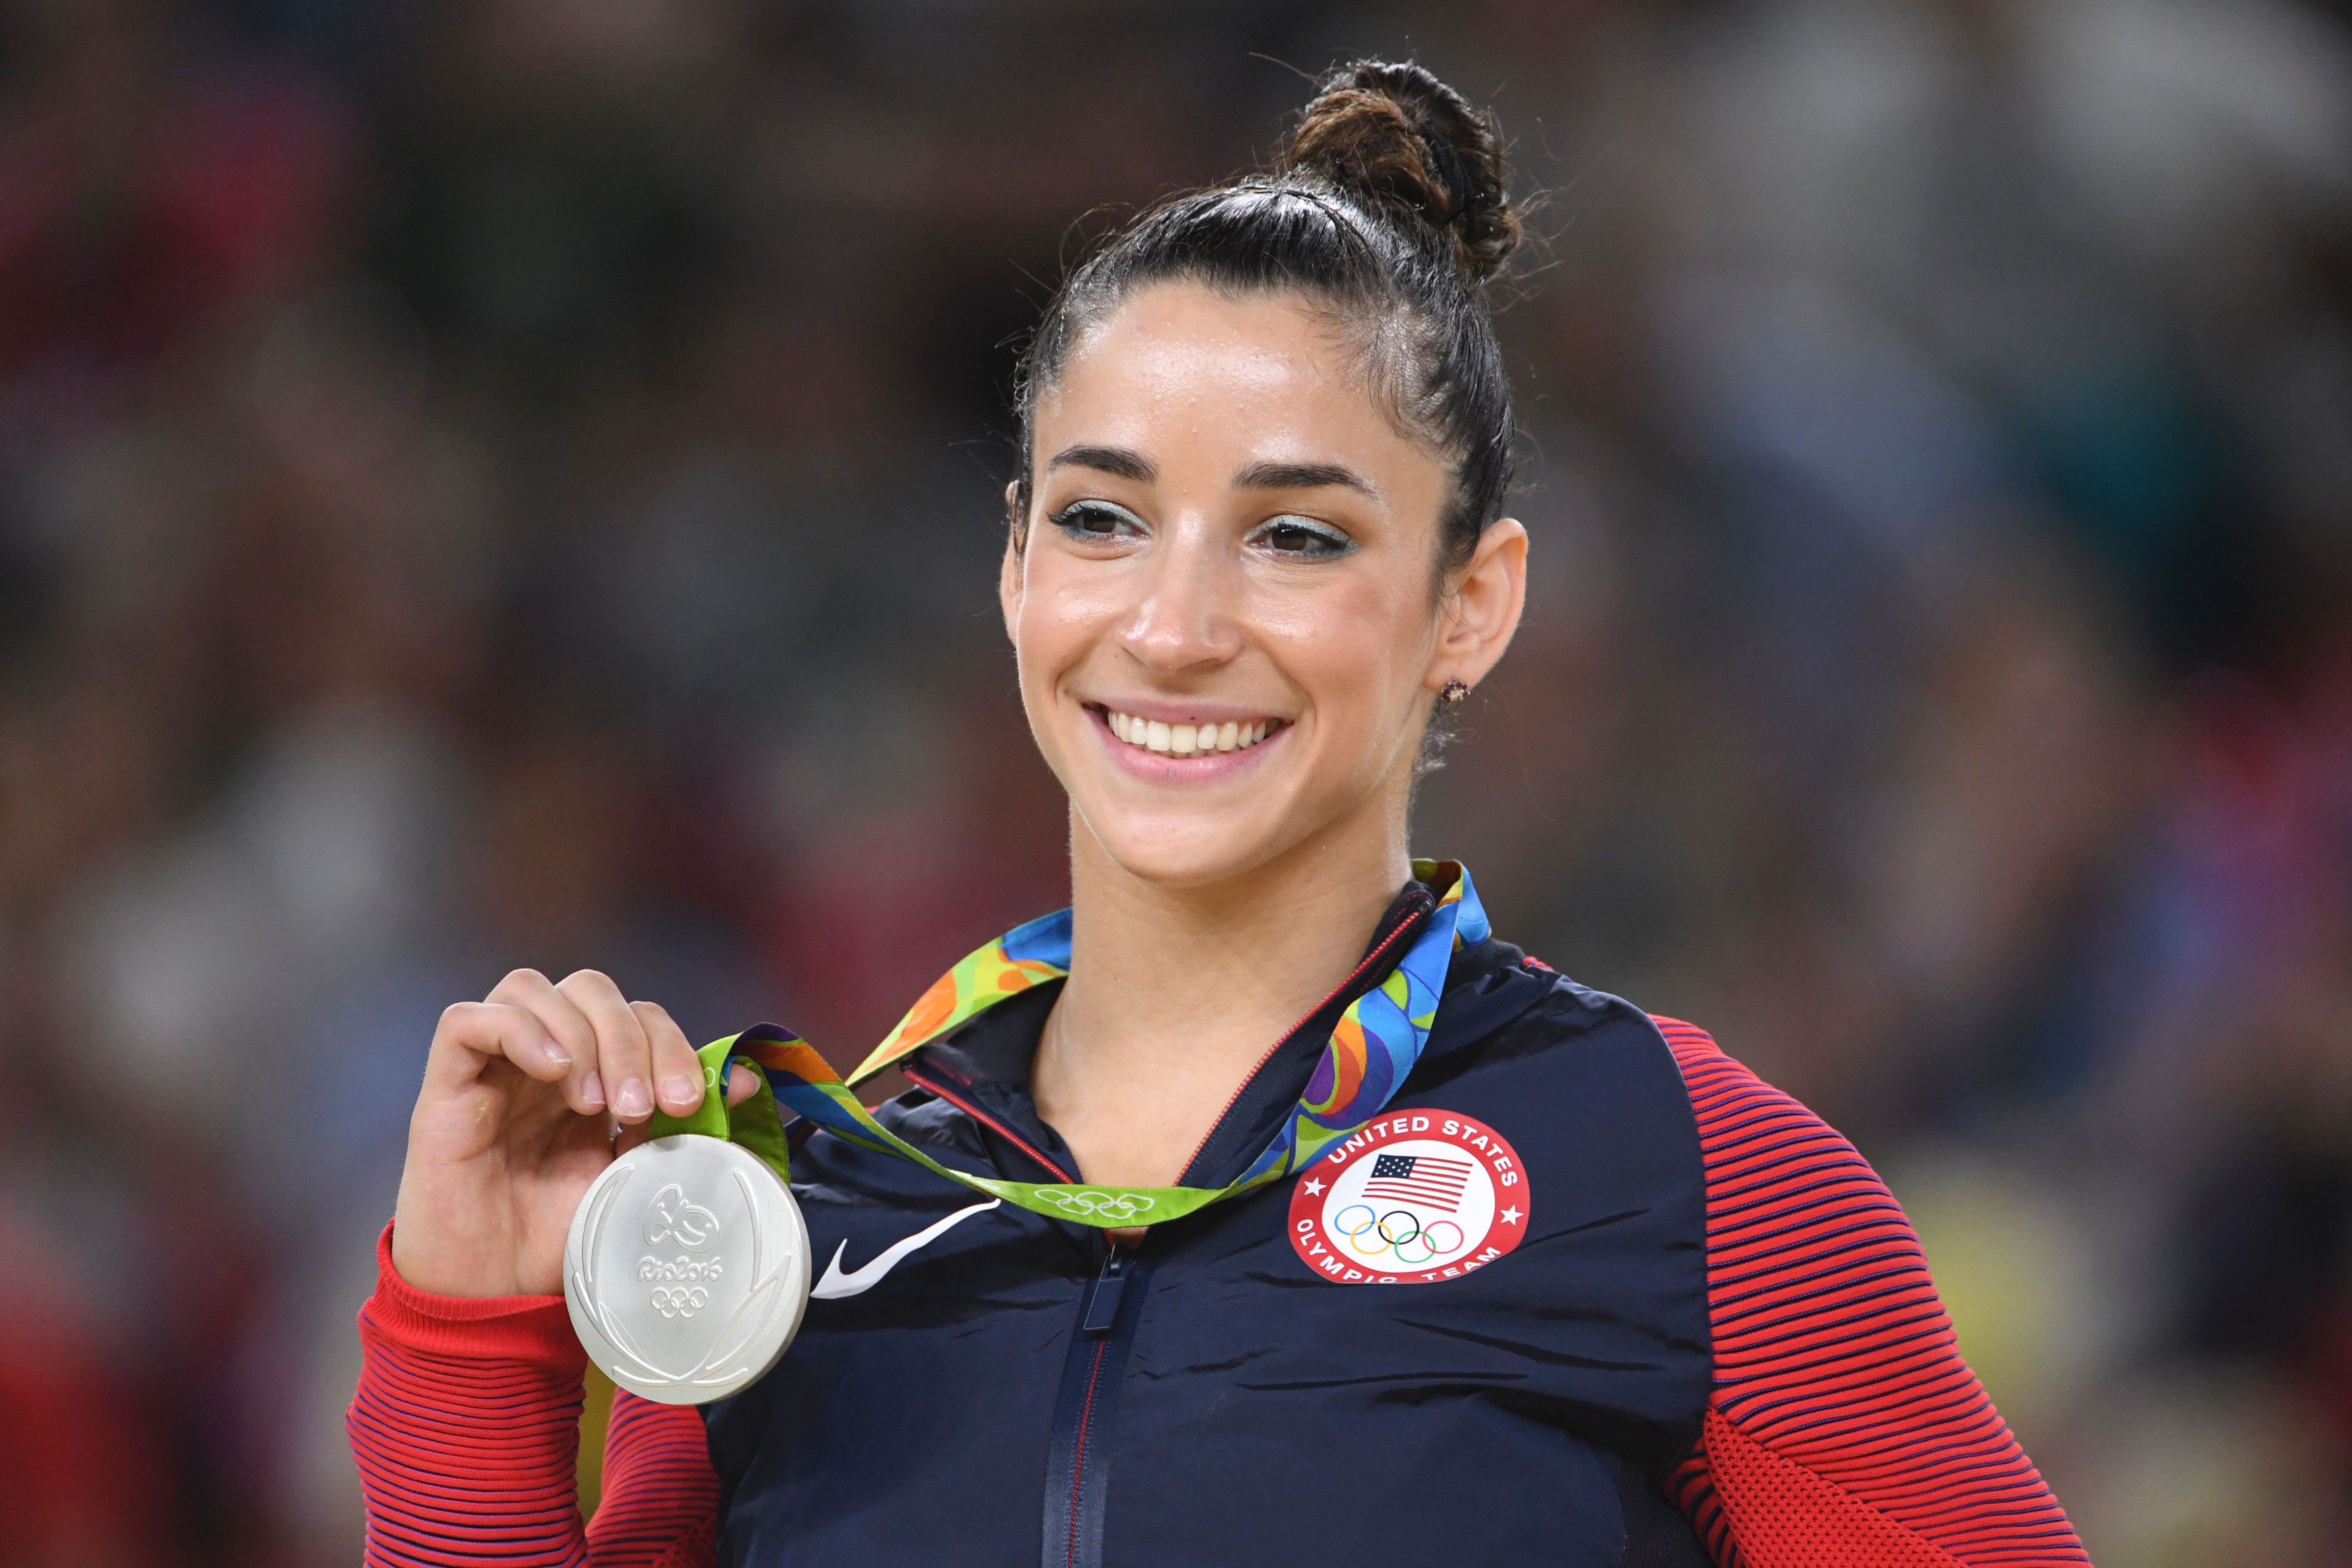 US gymnast Alexandra Raisman celebrates on the podium of the women's floor event final of the Artistic Gymnastics at the Olympic Arena during the Rio 2016 Olympic Games in Rio de Janeiro on August 16, 2016. / AFP / Toshifumi KITAMURA        (Photo credit should read TOSHIFUMI KITAMURA/AFP/Getty Images) (TOSHIFUMI KITAMURA&mdash;AFP/Getty Images)